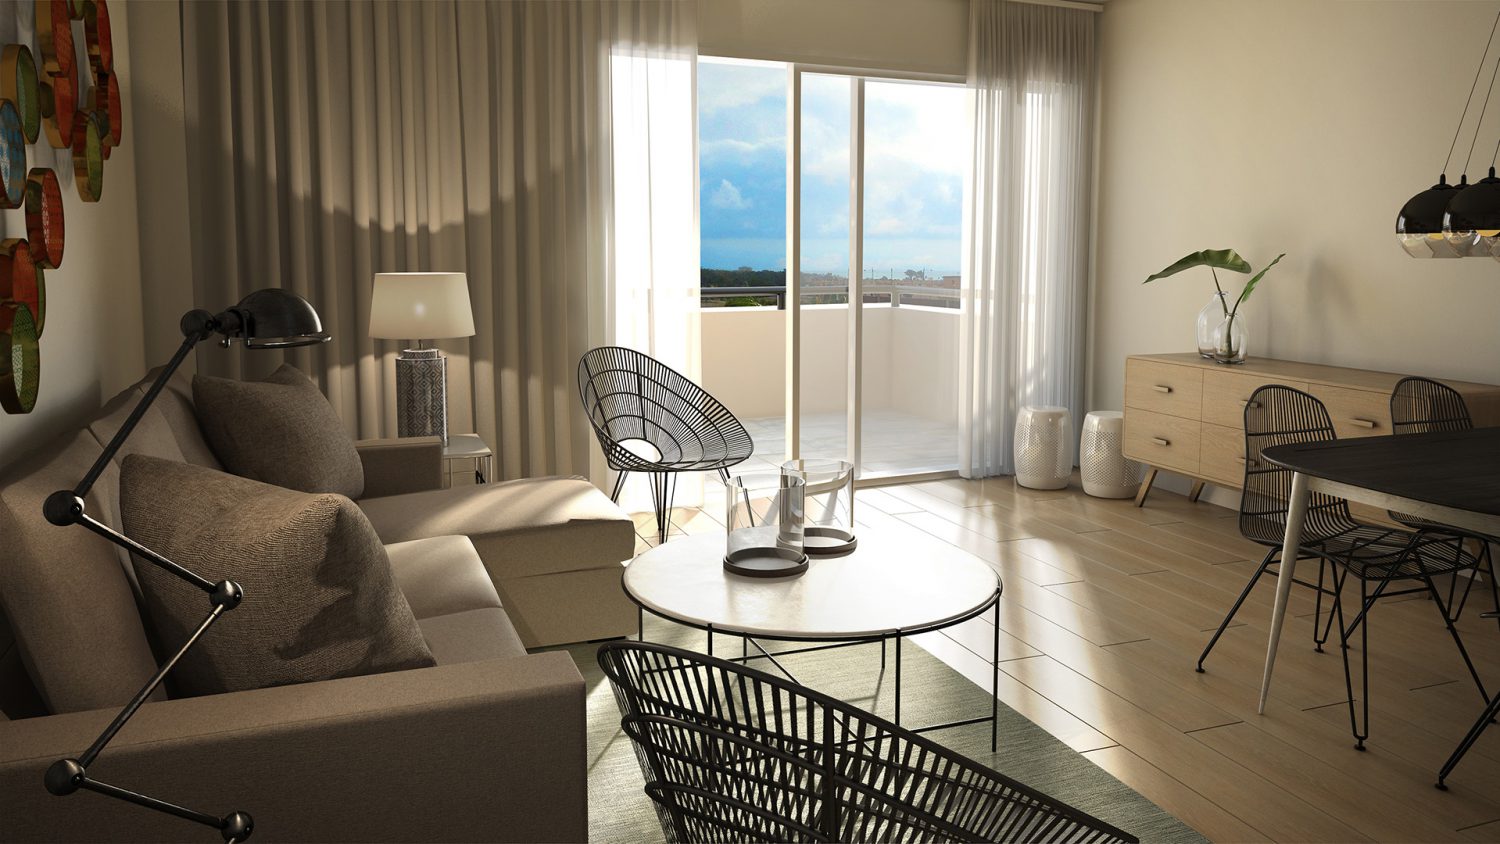 main image of new New Refurbished Contemporary Apartments in Torremolinos